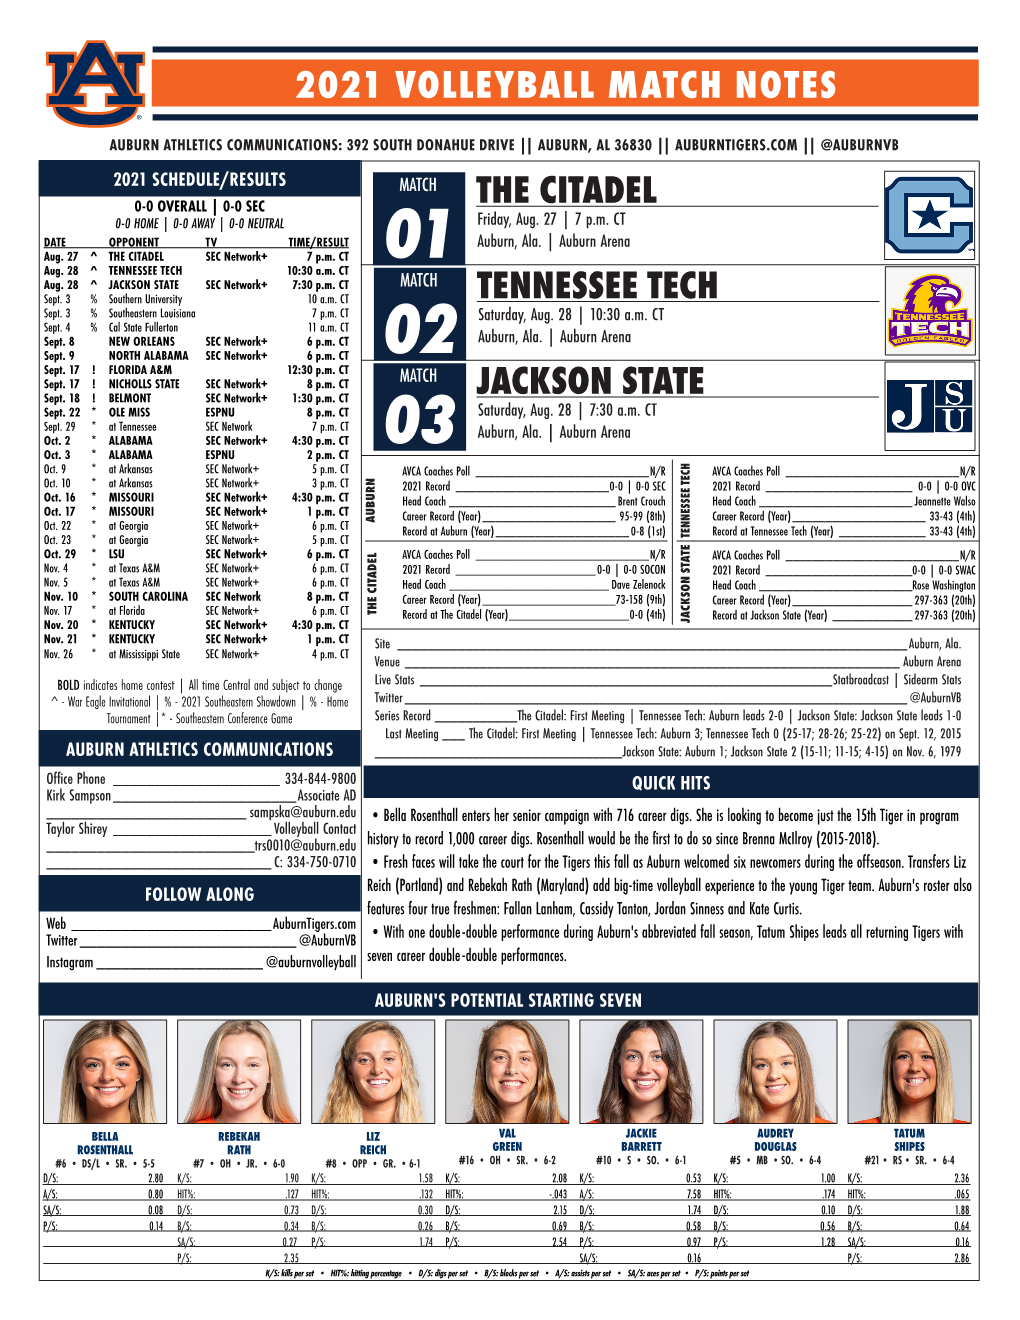 2021 Volleyball Match Notes the Citadel Jackson State Tennessee Tech